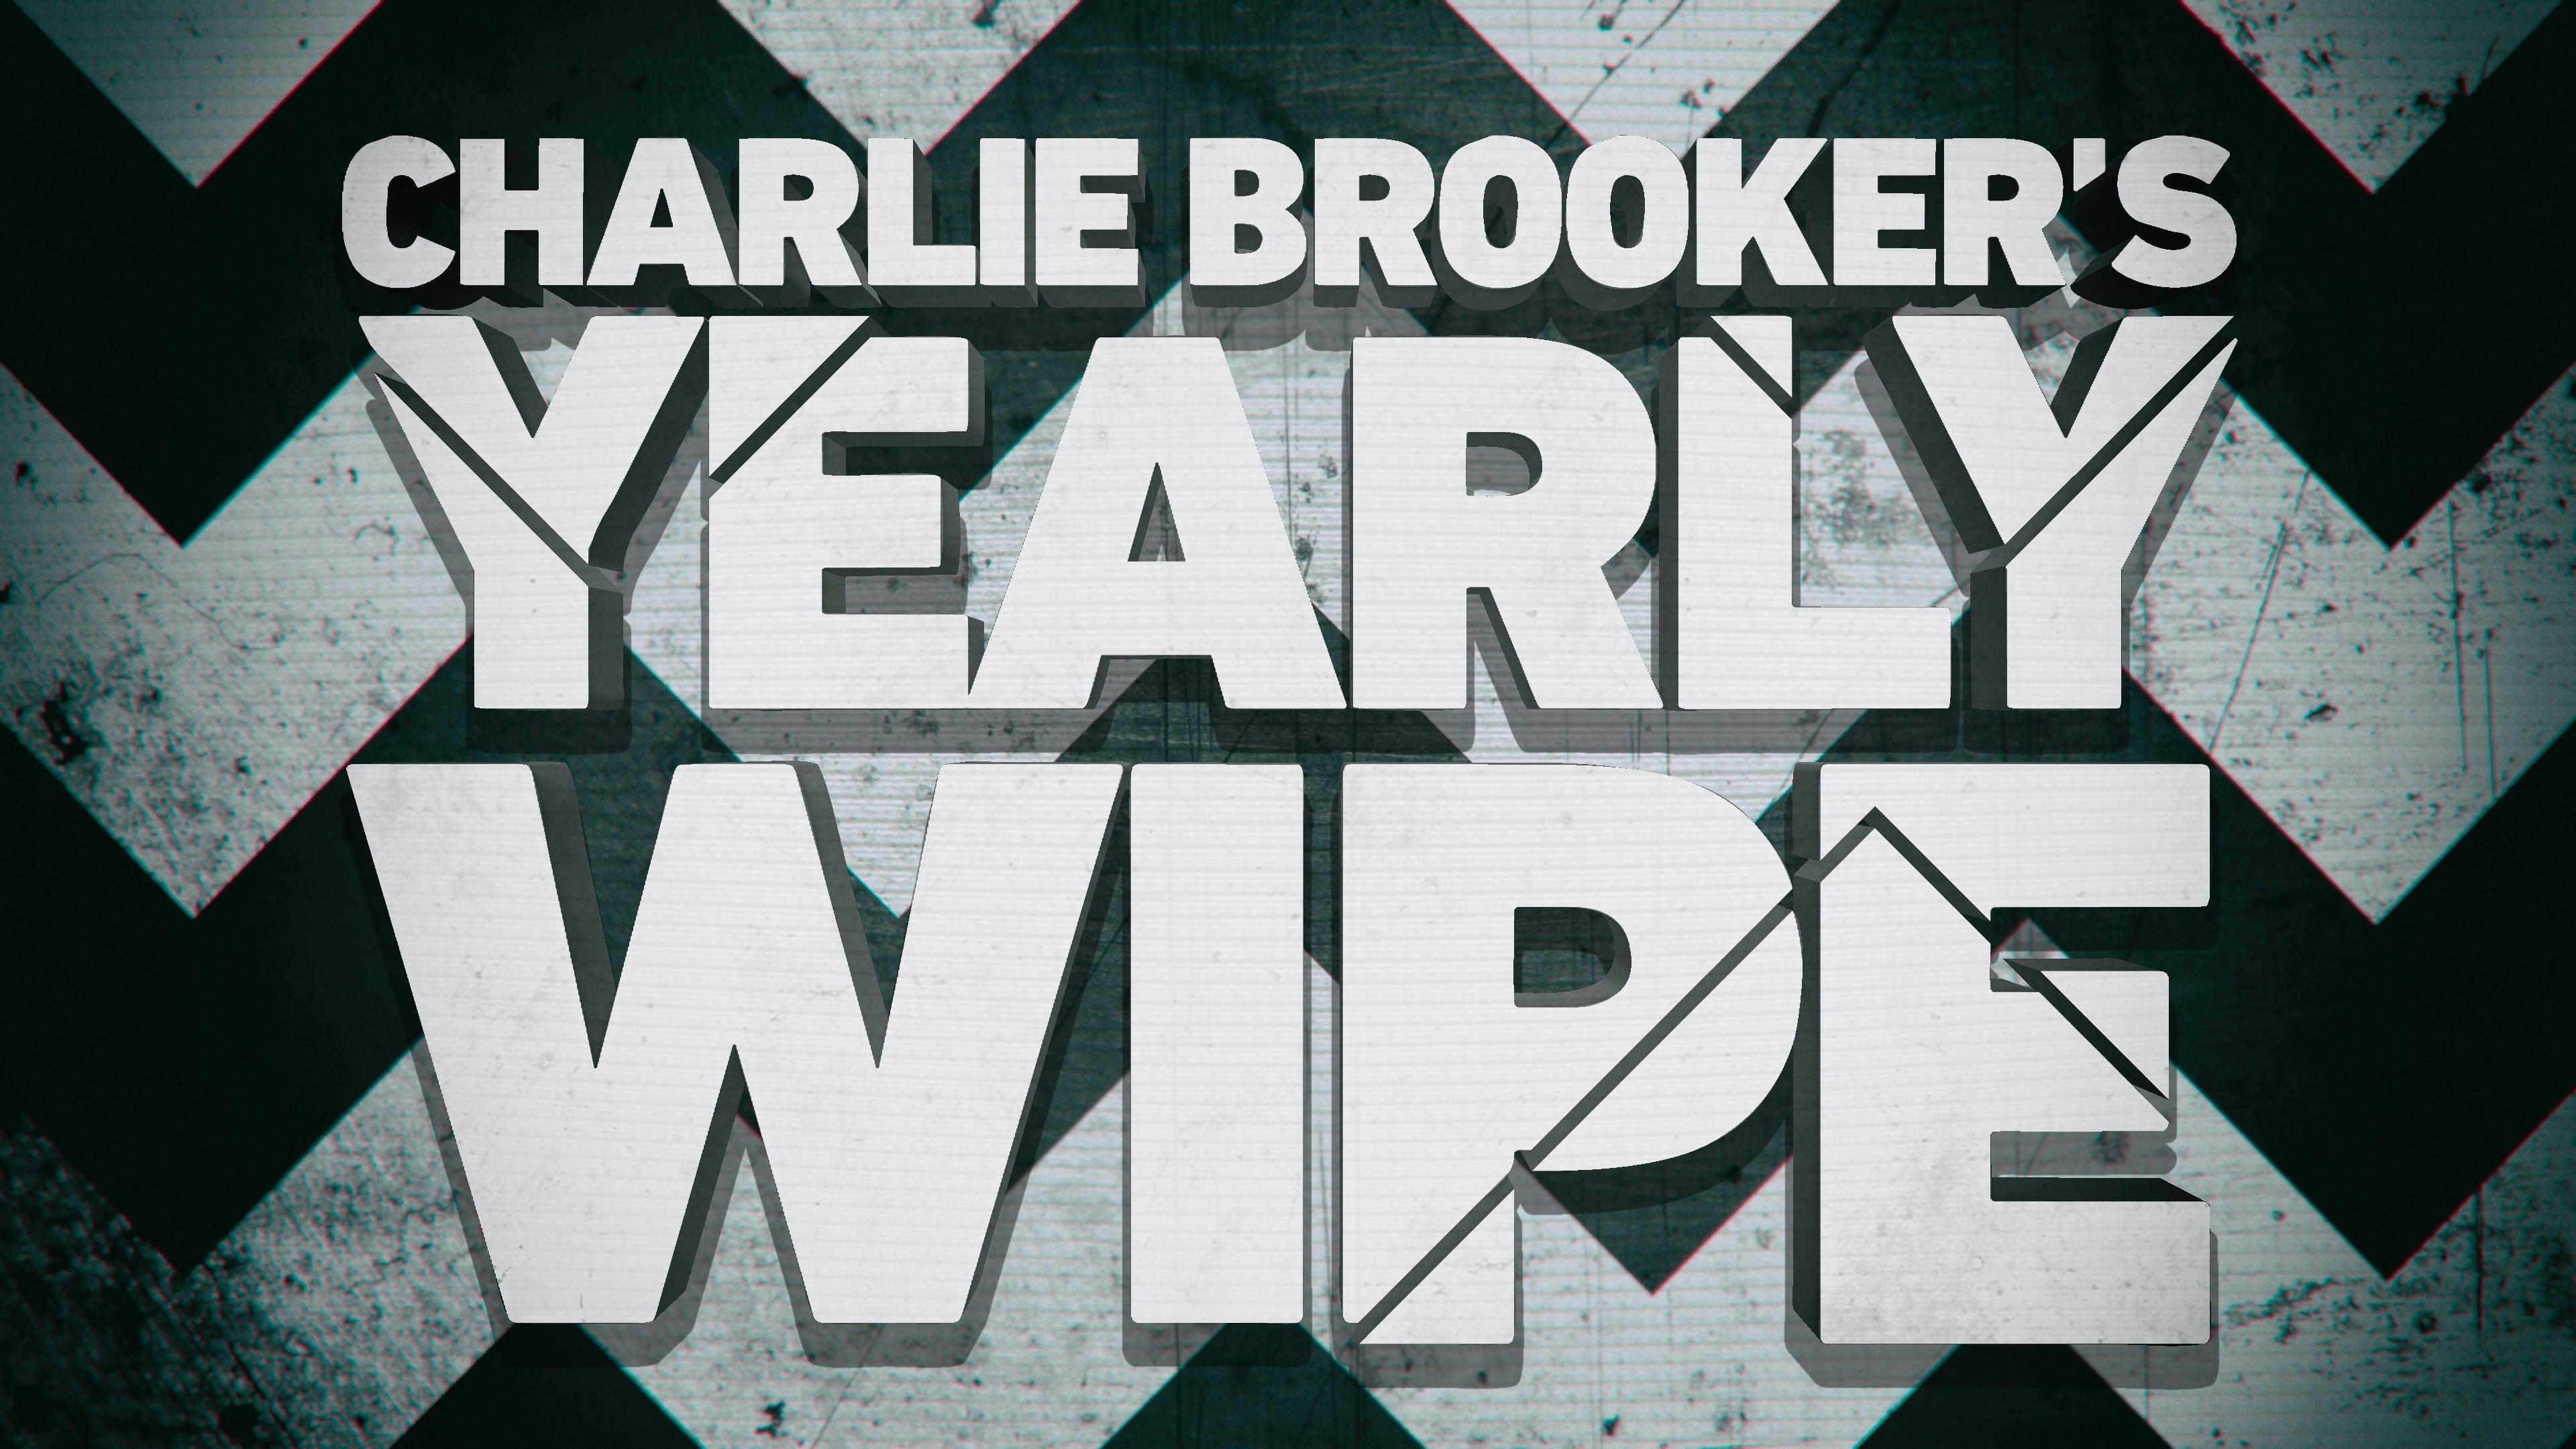 Charlie Brooker's Yearly Wipe backdrop